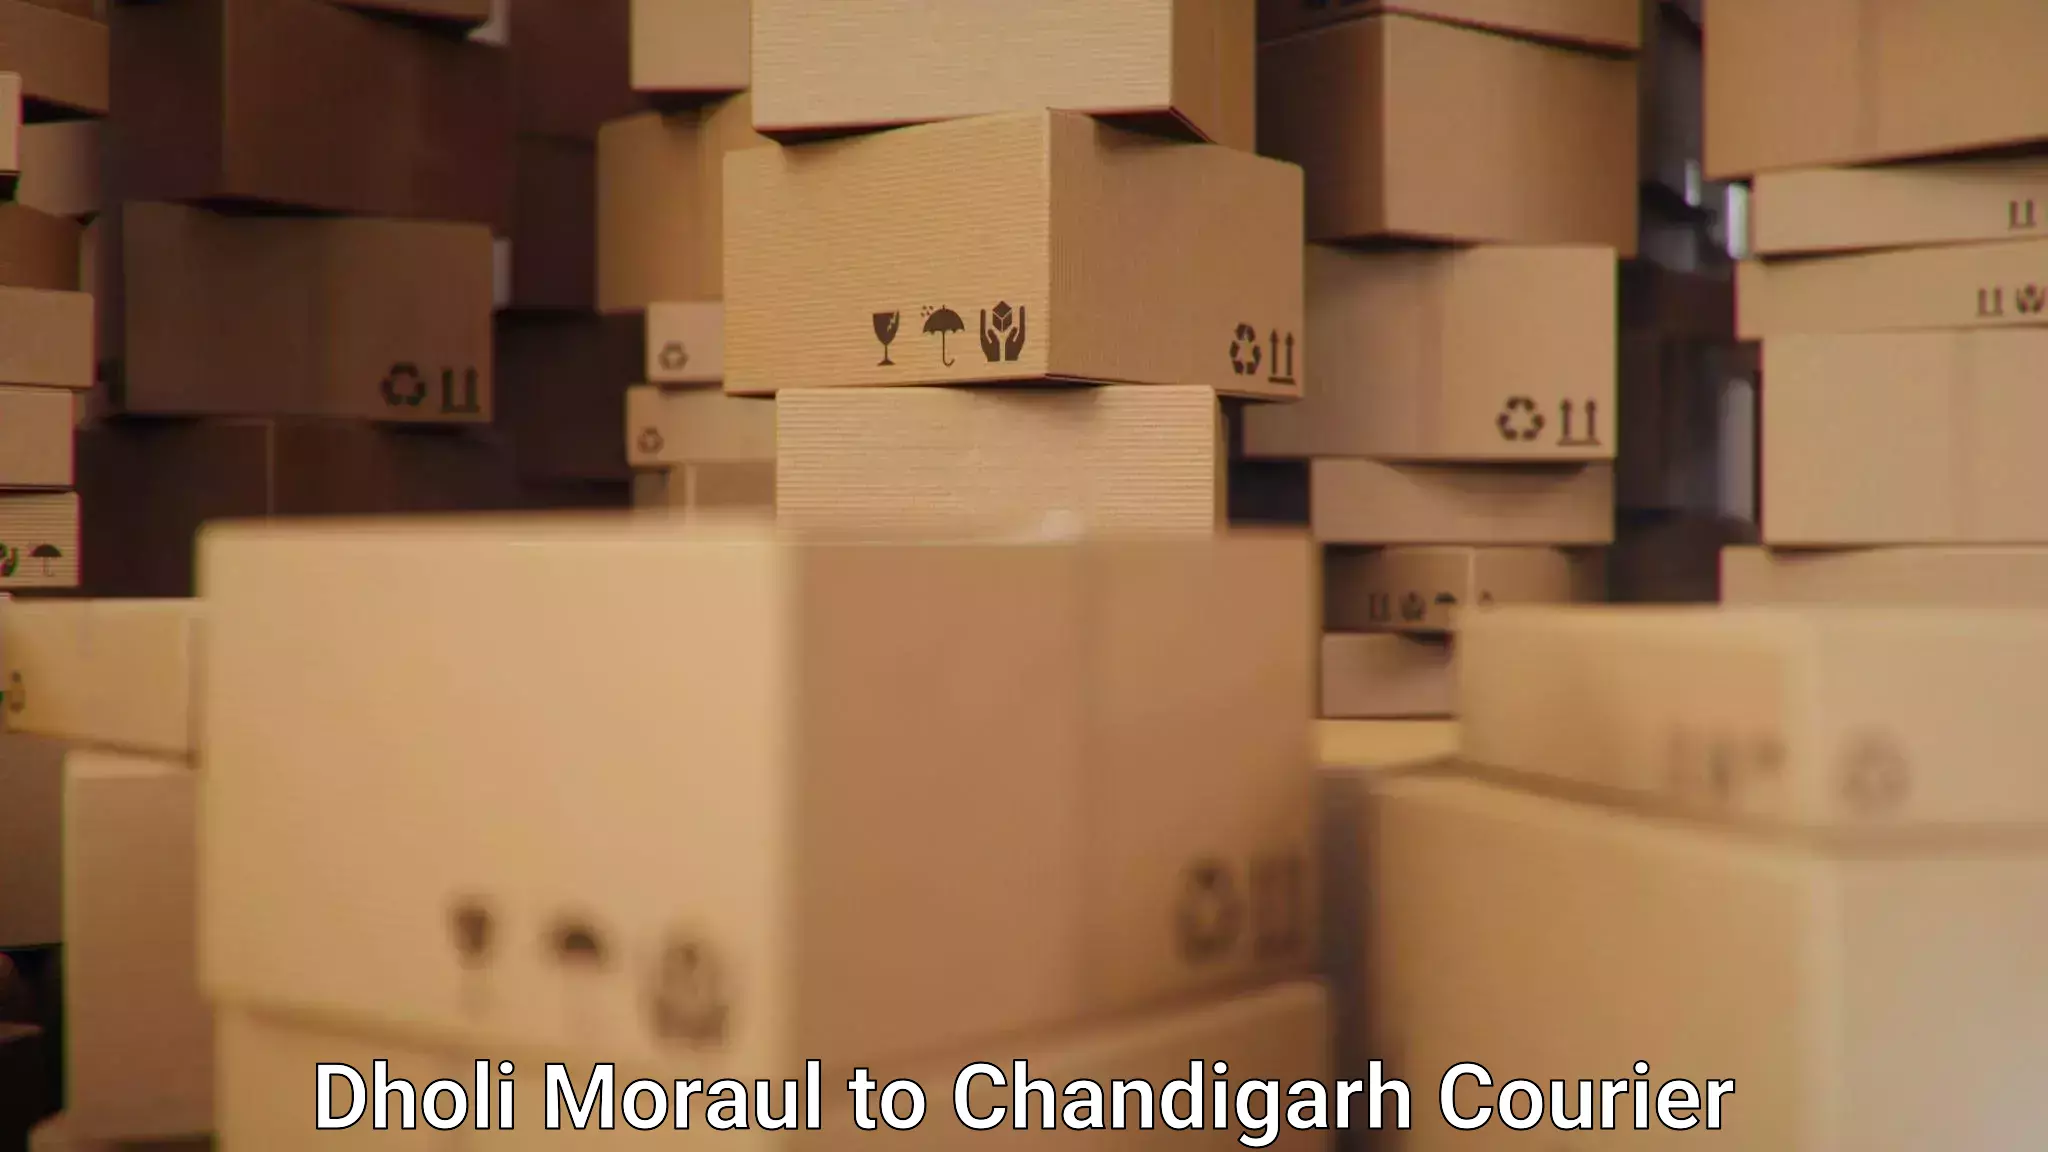 Rural area delivery Dholi Moraul to Chandigarh